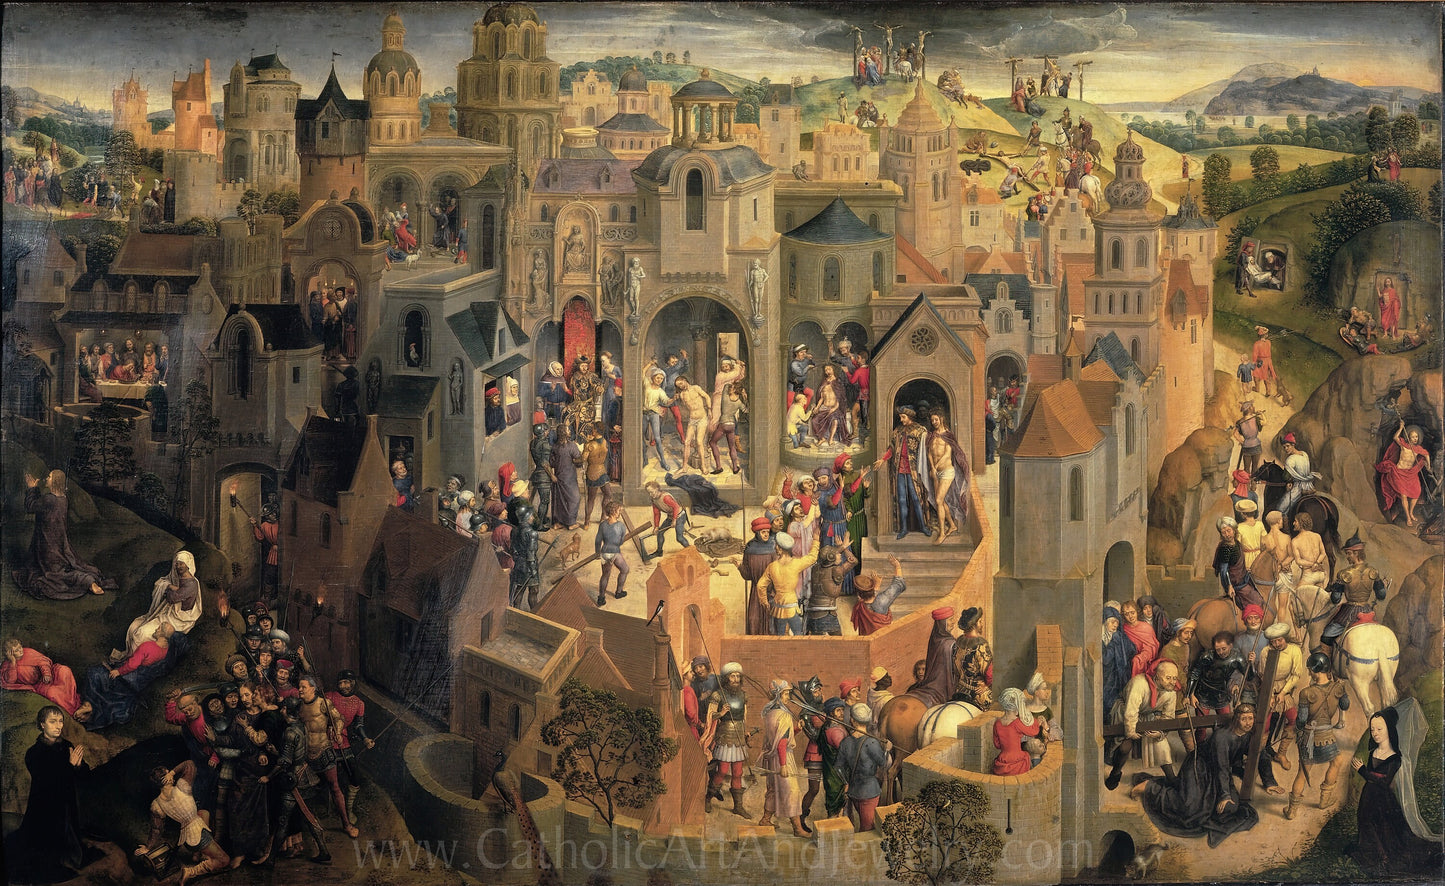 Scenes from the Passion of Christ – Hans Memling– 3 sizes – Catholic Art Print – Archival Quality